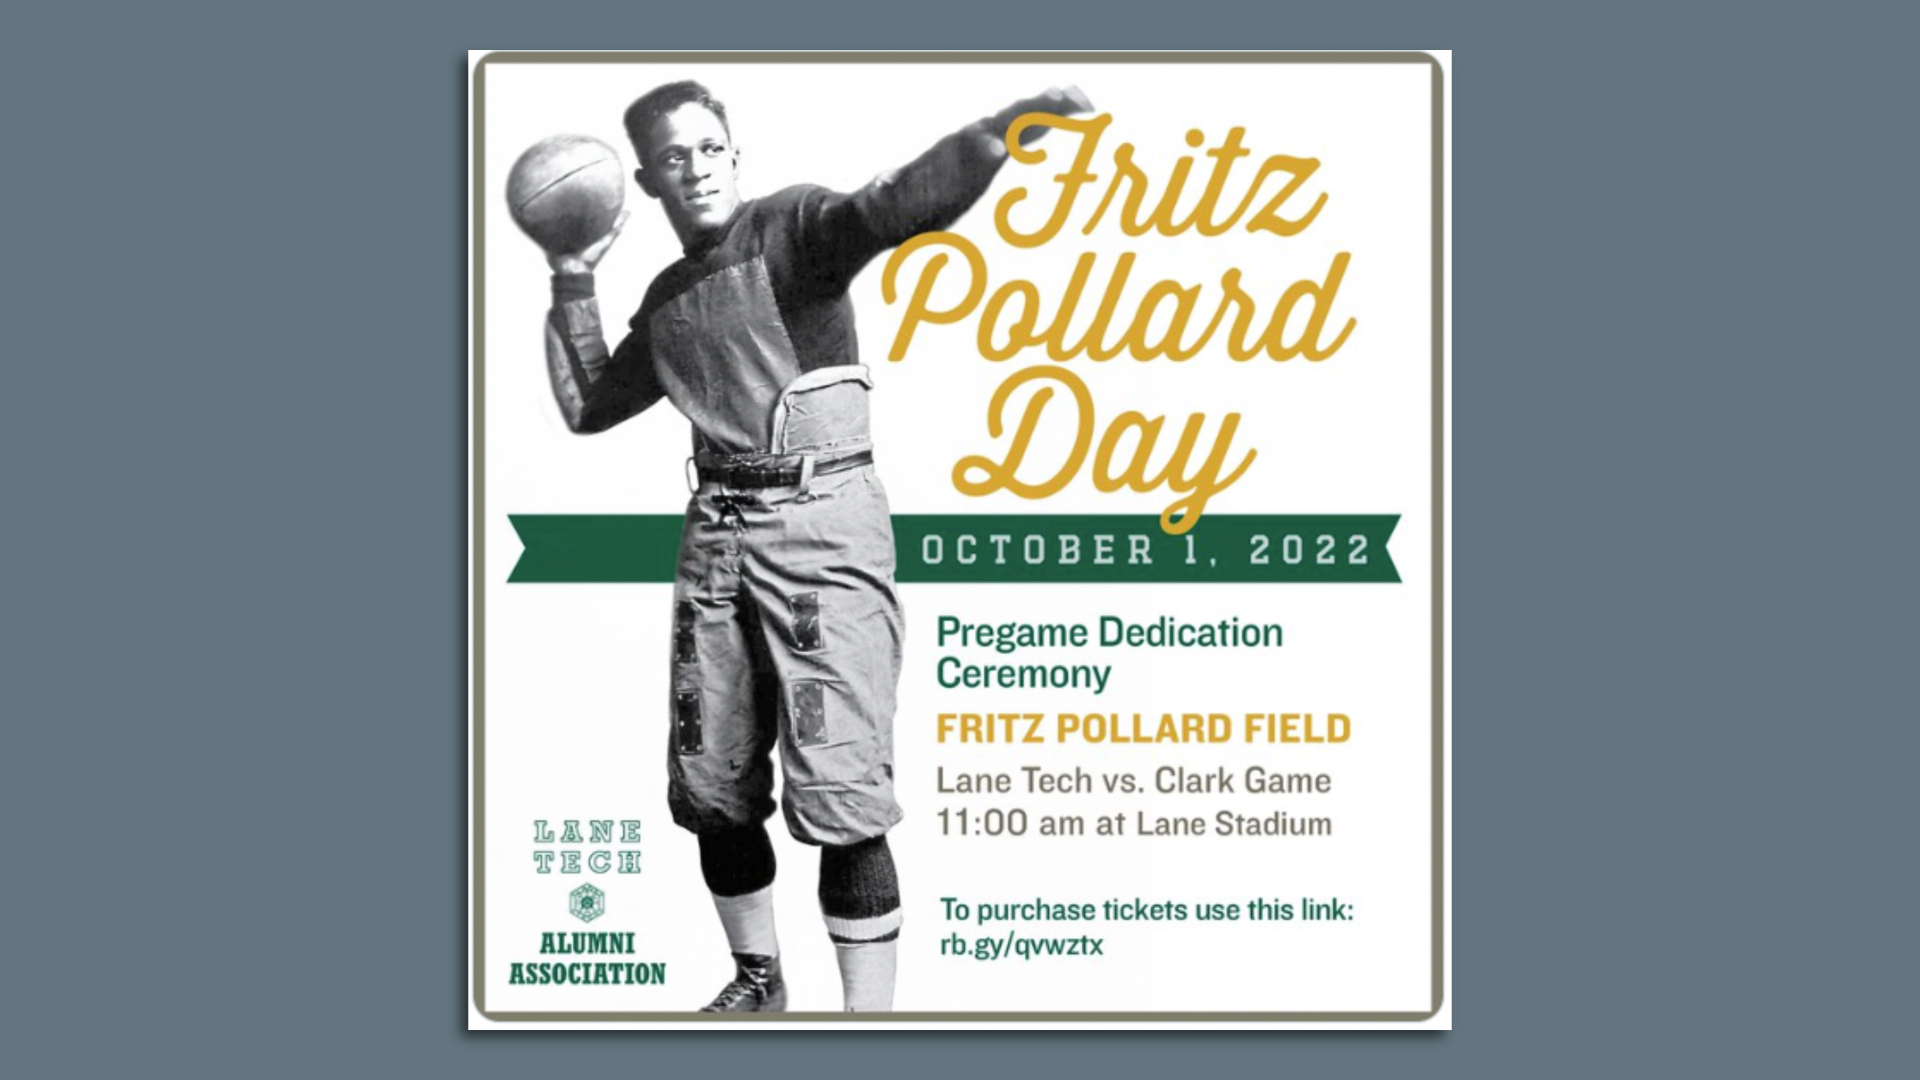 A flyer promoting "Fritz Pollard Day" showing a man throwing a football. 